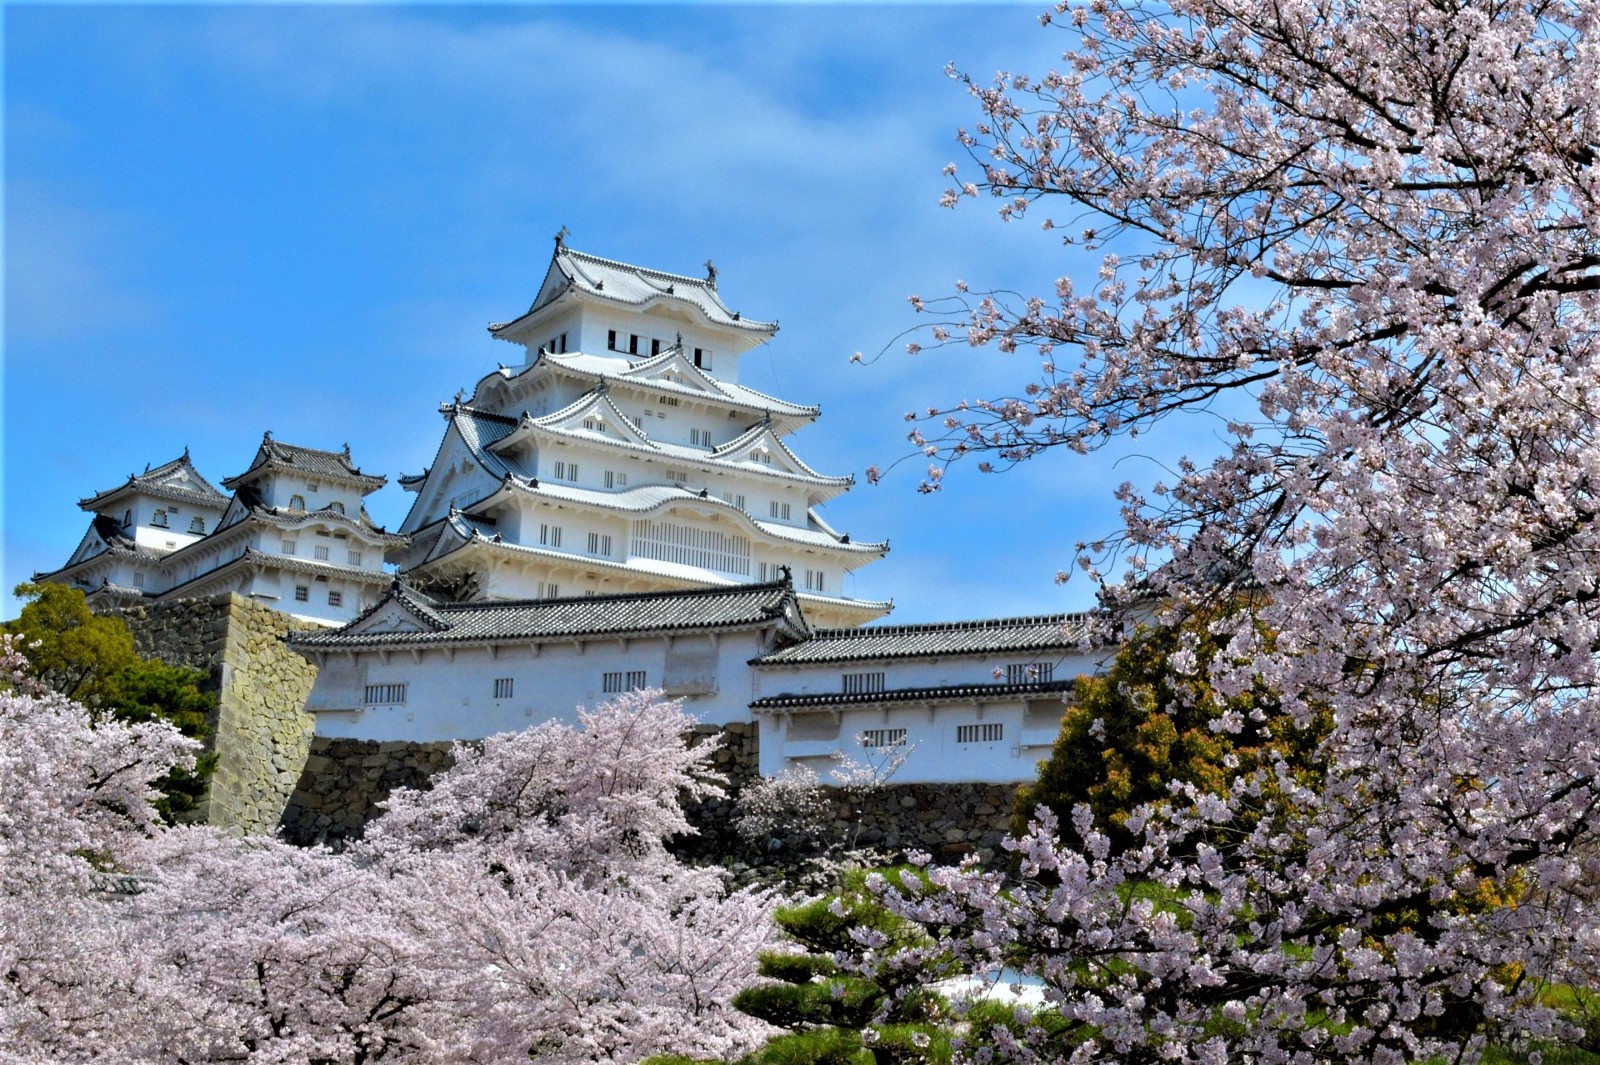 10 Top Tourist Attractions in Japan